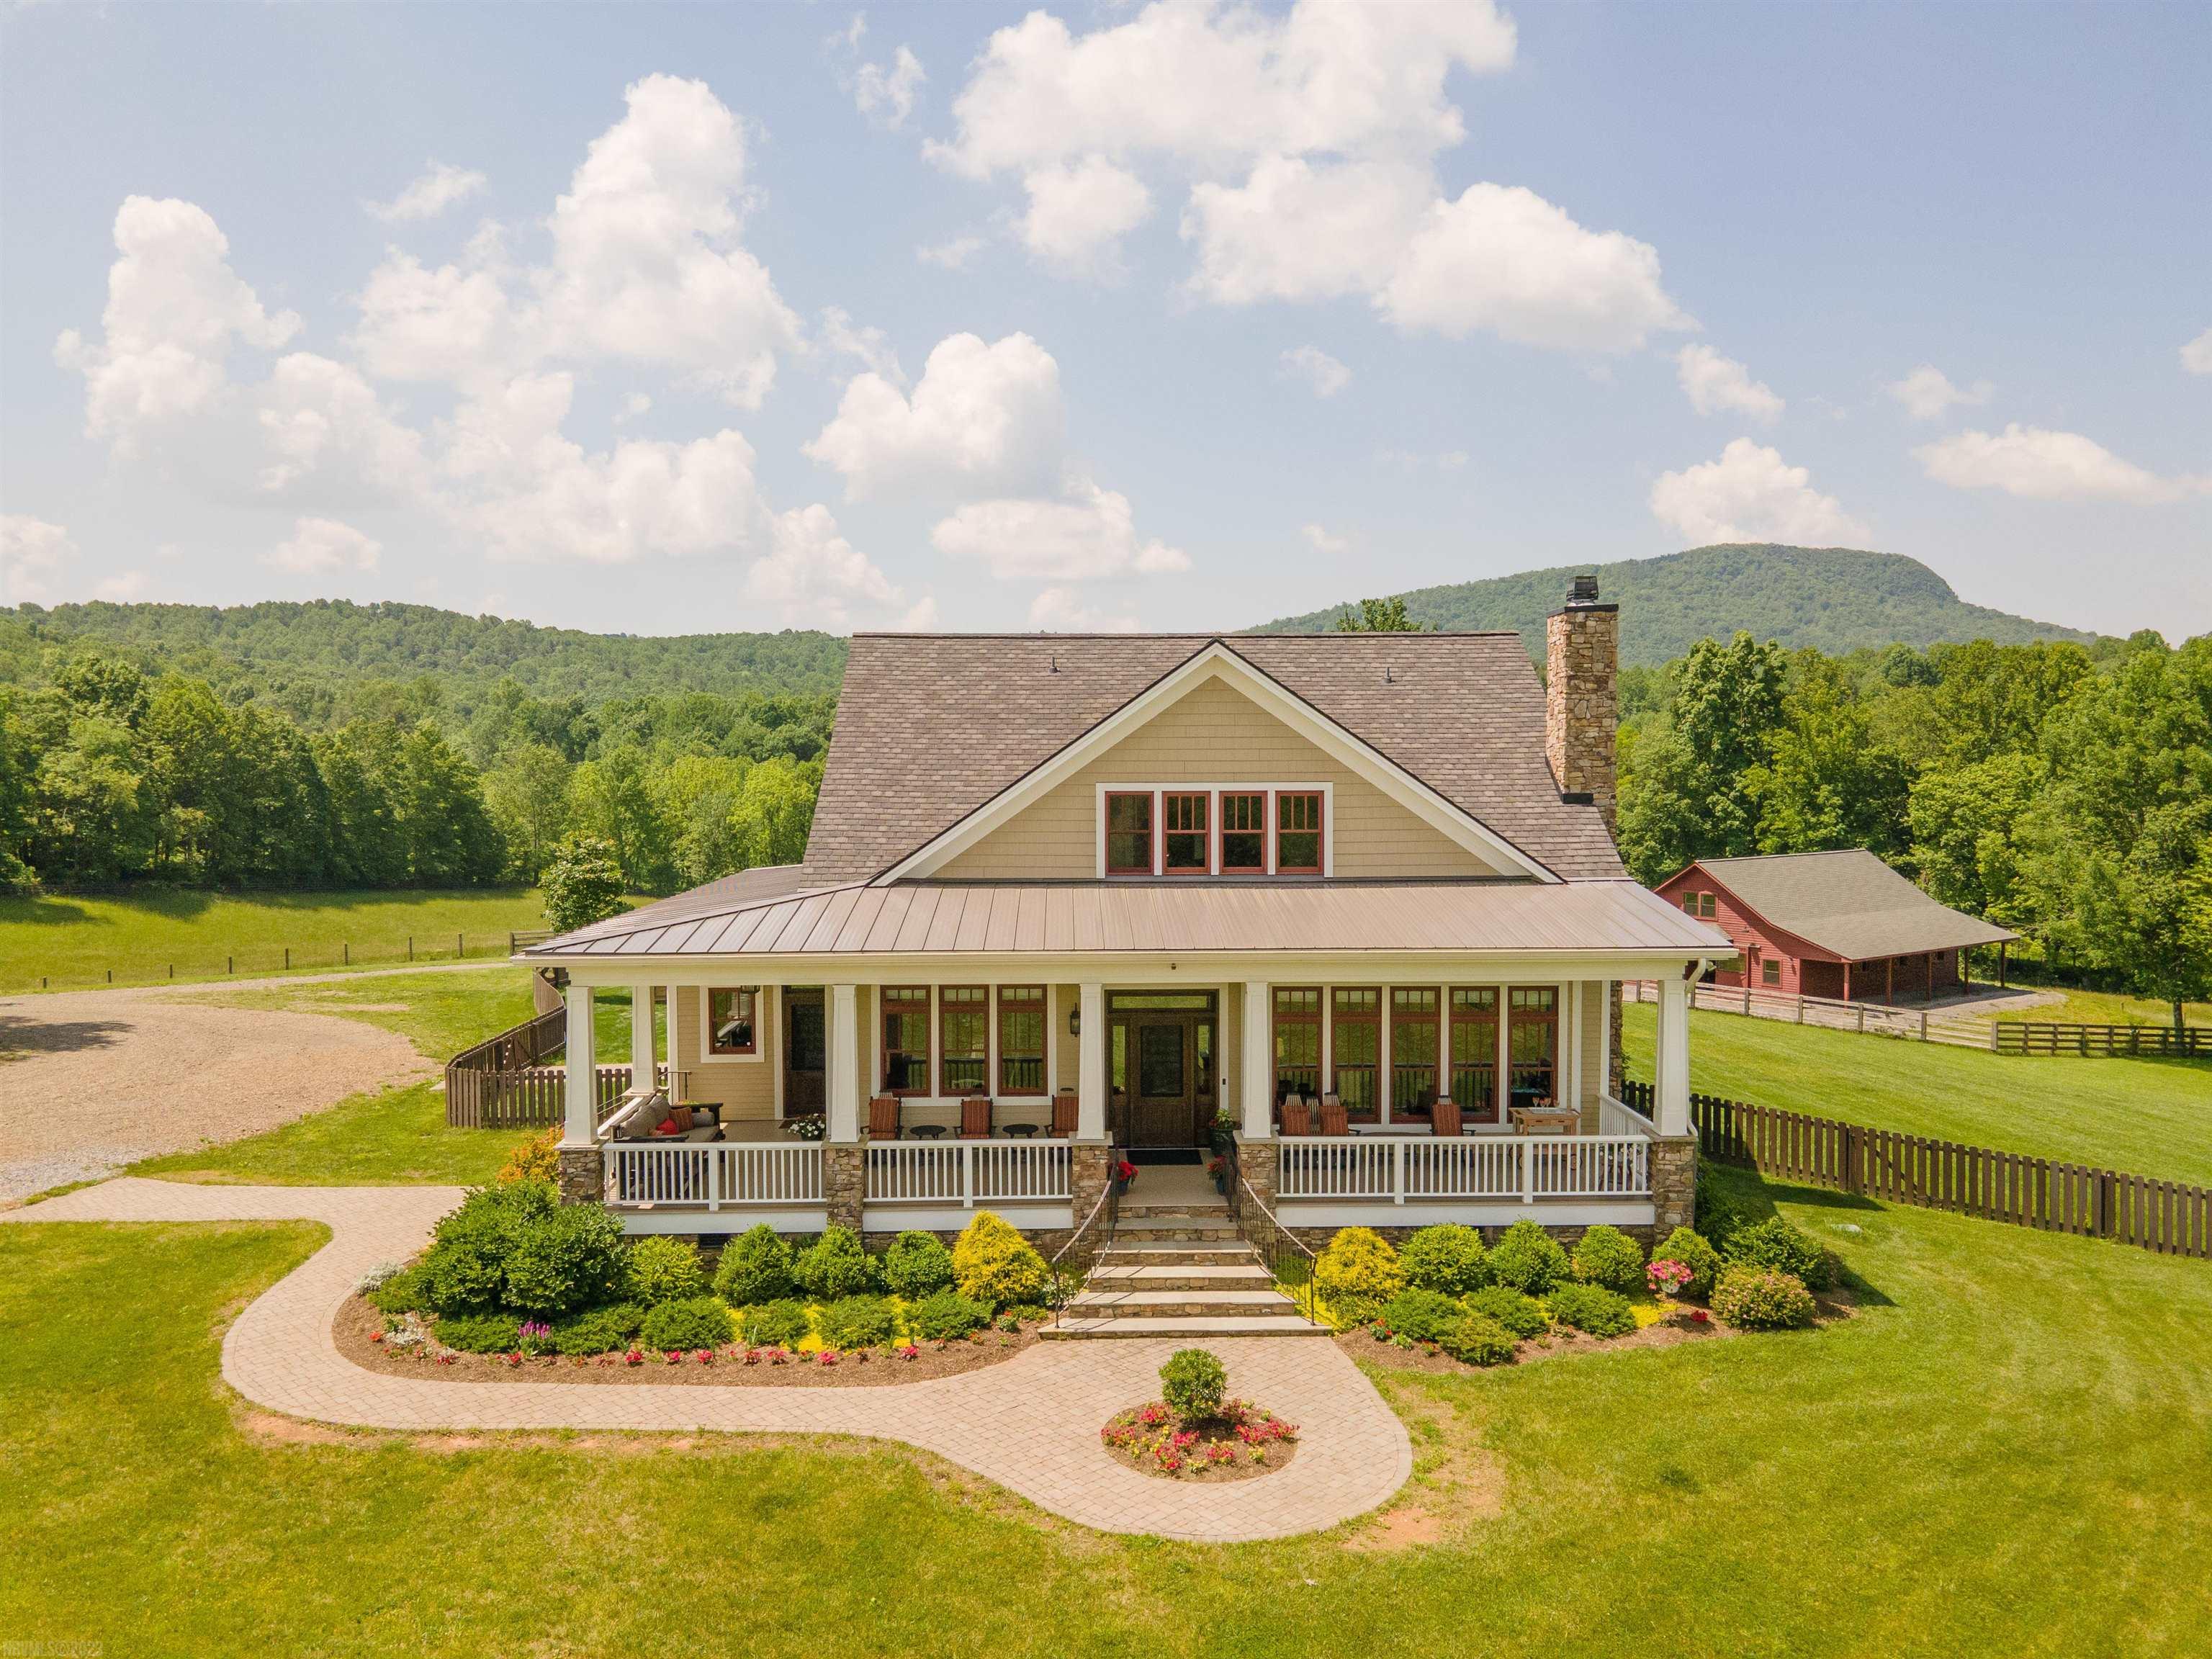 Welcome home to this spectacular horse property nestled in the Blue Ridge Mountains near Floyd Virginia. Hailed by Southern Living and USA Today as one of the South's Best Small Towns. Four miles from the Parkway, close to wineries and the exclusive Primland Resort. With 105gorgeous acres and stunning 360-degree mountain views, this farm has hosted weddings and horse clinics. Two luxury homes, two barns, upscale barn apartment and large arena. The primary residence, completed in 2017, boasts exquisite indoor-outdoor living at it's finest and breathtaking views from every room. High-end luxury finishes throughout create a warm atmosphere that make this home truly special. Guests will love the serene setting of the restored farmhouse. From the spring-fed bass pond to the apple orchard, this house has a charm all it's own. The main barn, built in 2020, is a horse lover's dream. Gorgeous floor-to-ceiling tongue-and-groove pine & air conditioned tack room, rubber pavers & wash stall.